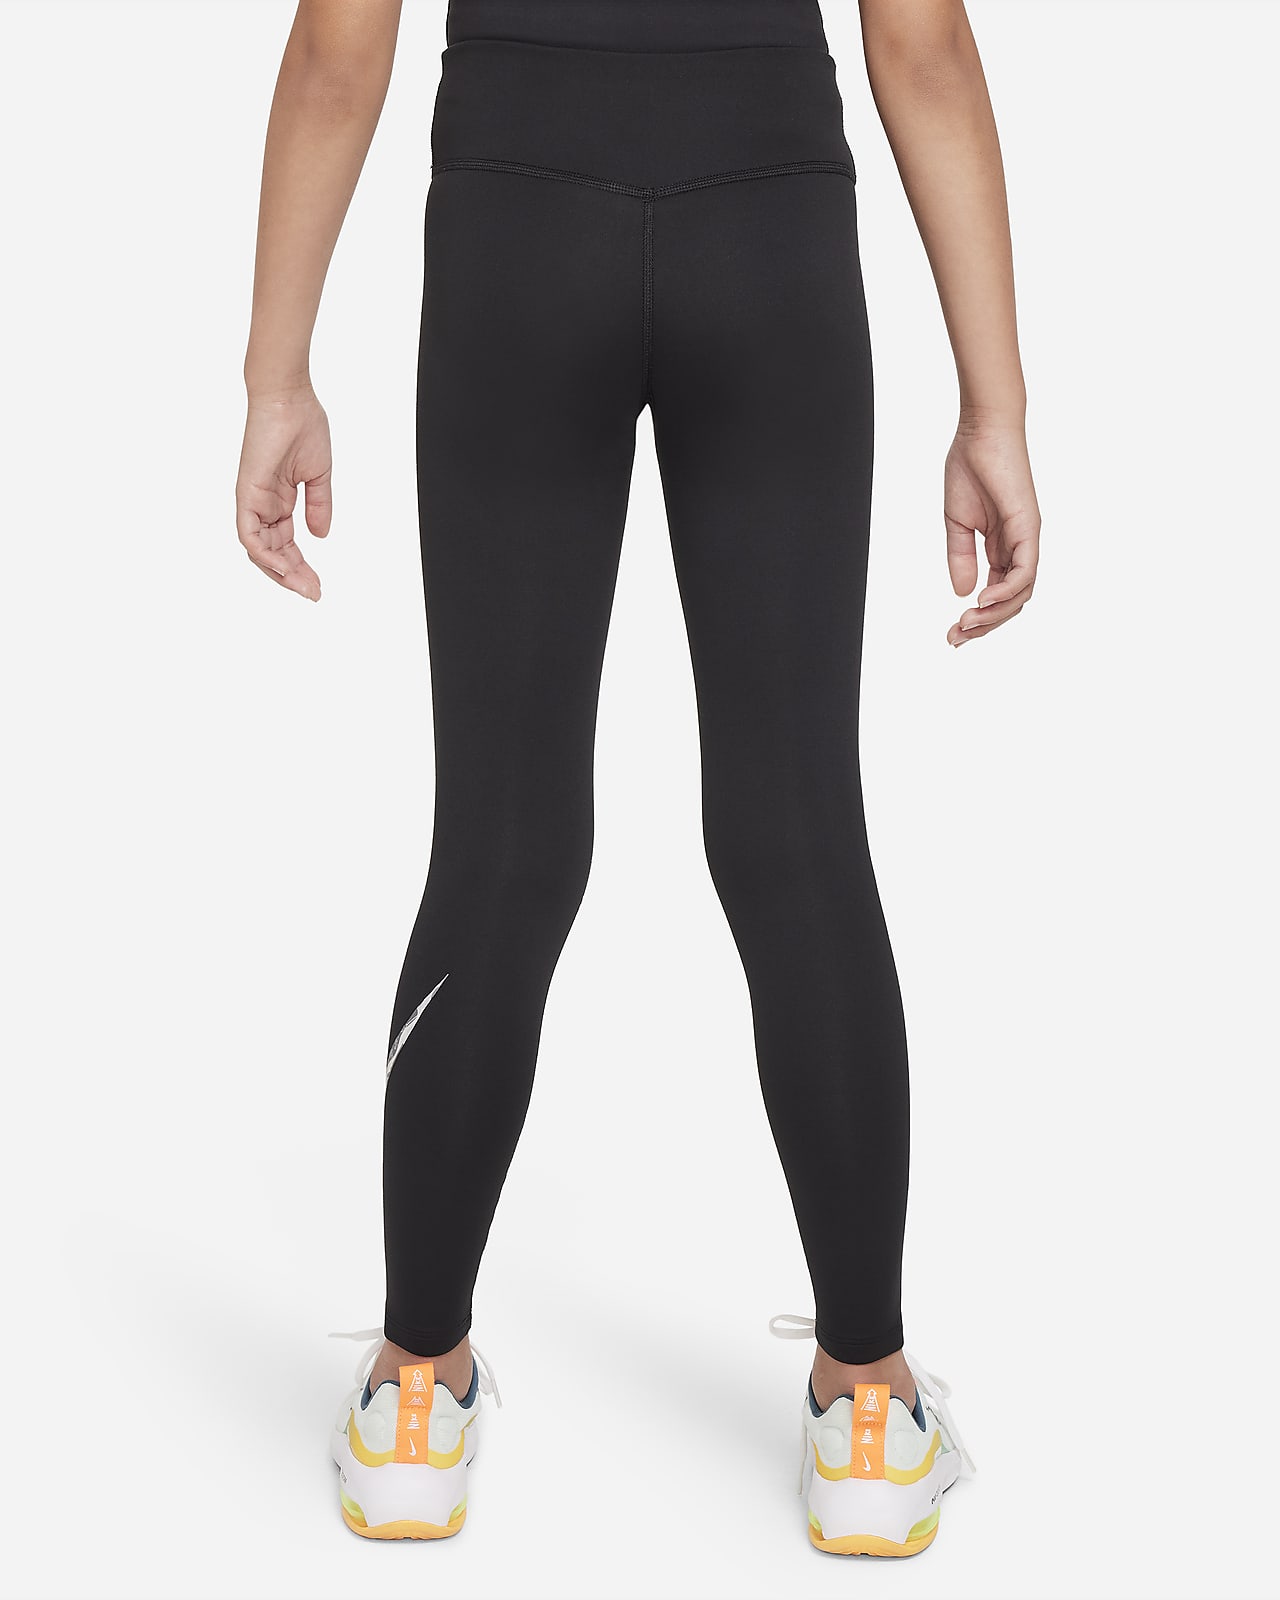 https://static.nike.com/a/images/t_PDP_1280_v1/f_auto,q_auto:eco/37d768e0-d4fe-4fff-9b8c-1dff1b5306dd/leggings-da-training-dri-fit-one-Ph85Gv.png